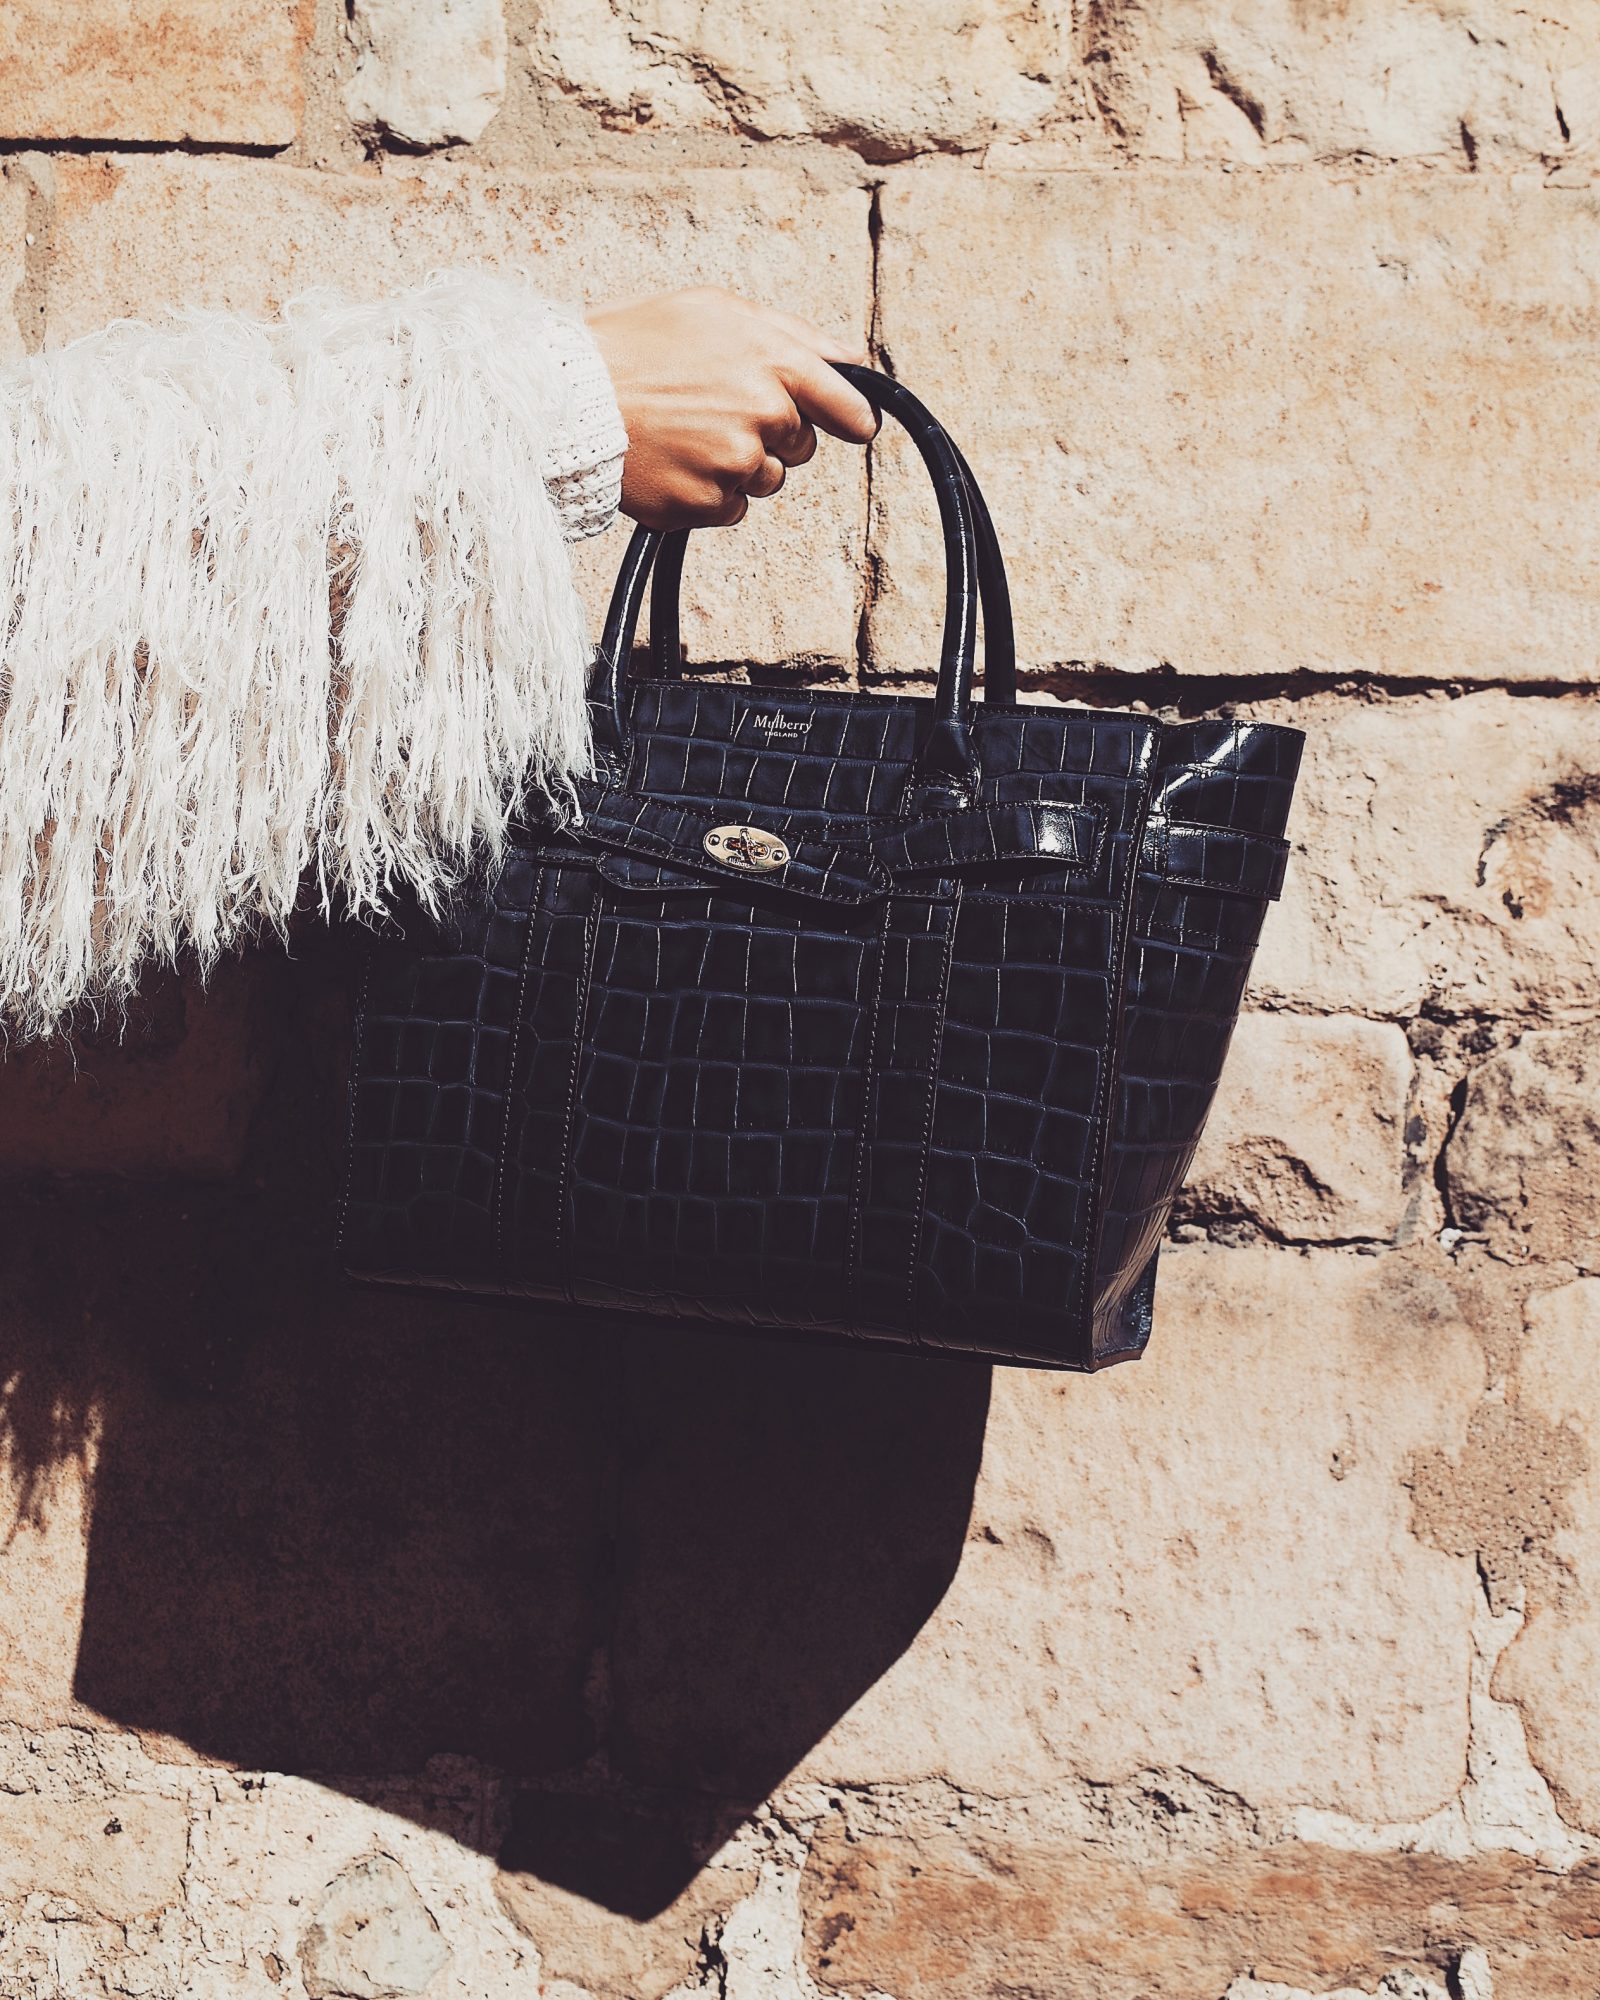 The Mulberry Bayswater | Bringing The Classics Back